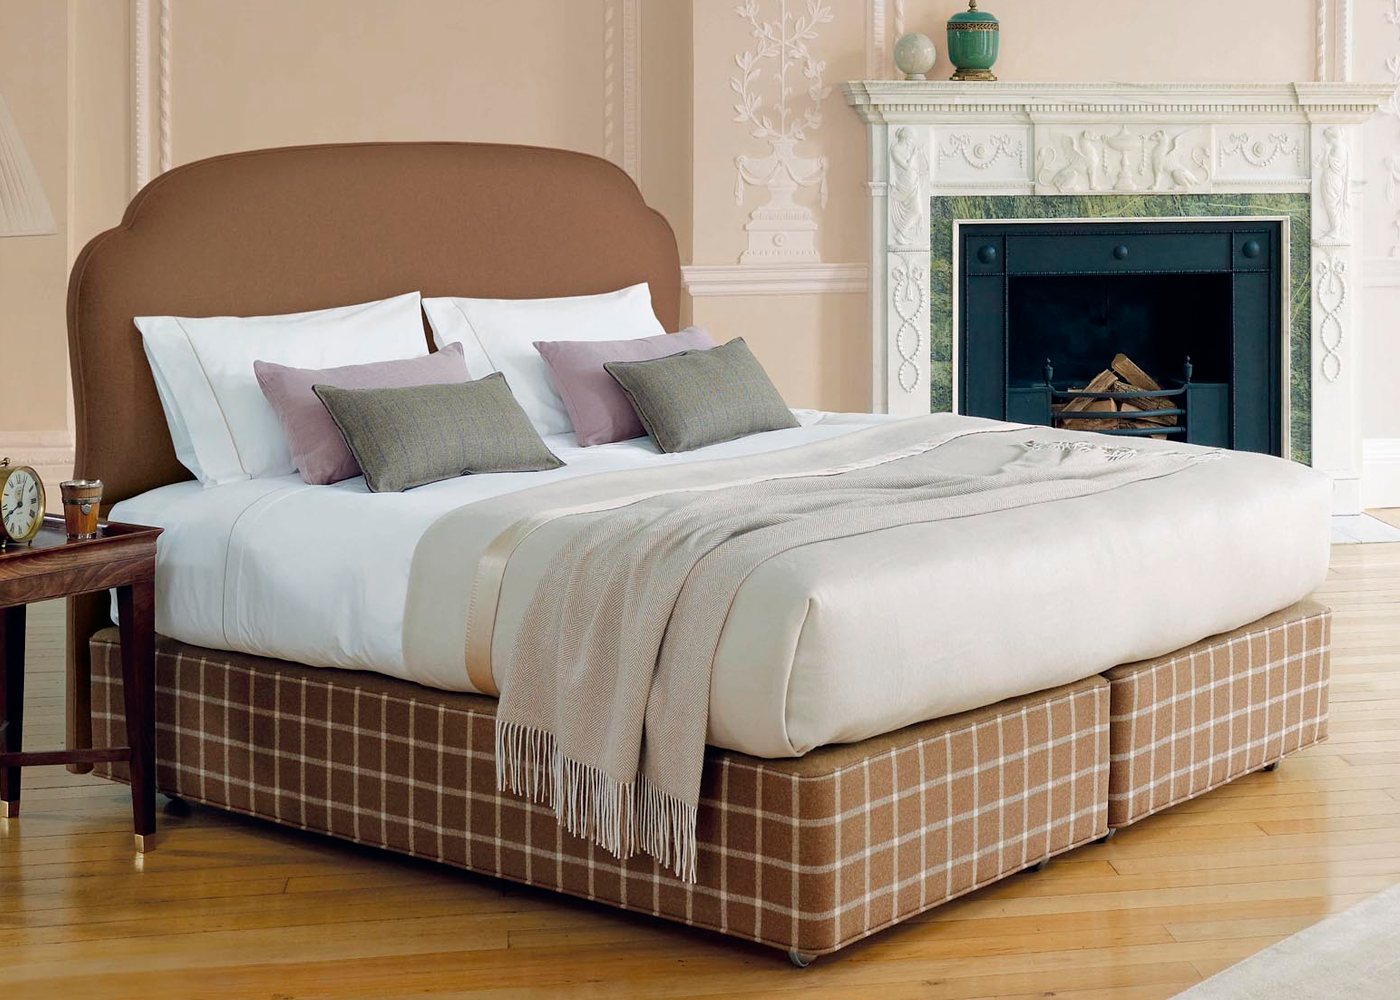 vi spring traditional bedstead mattress king size